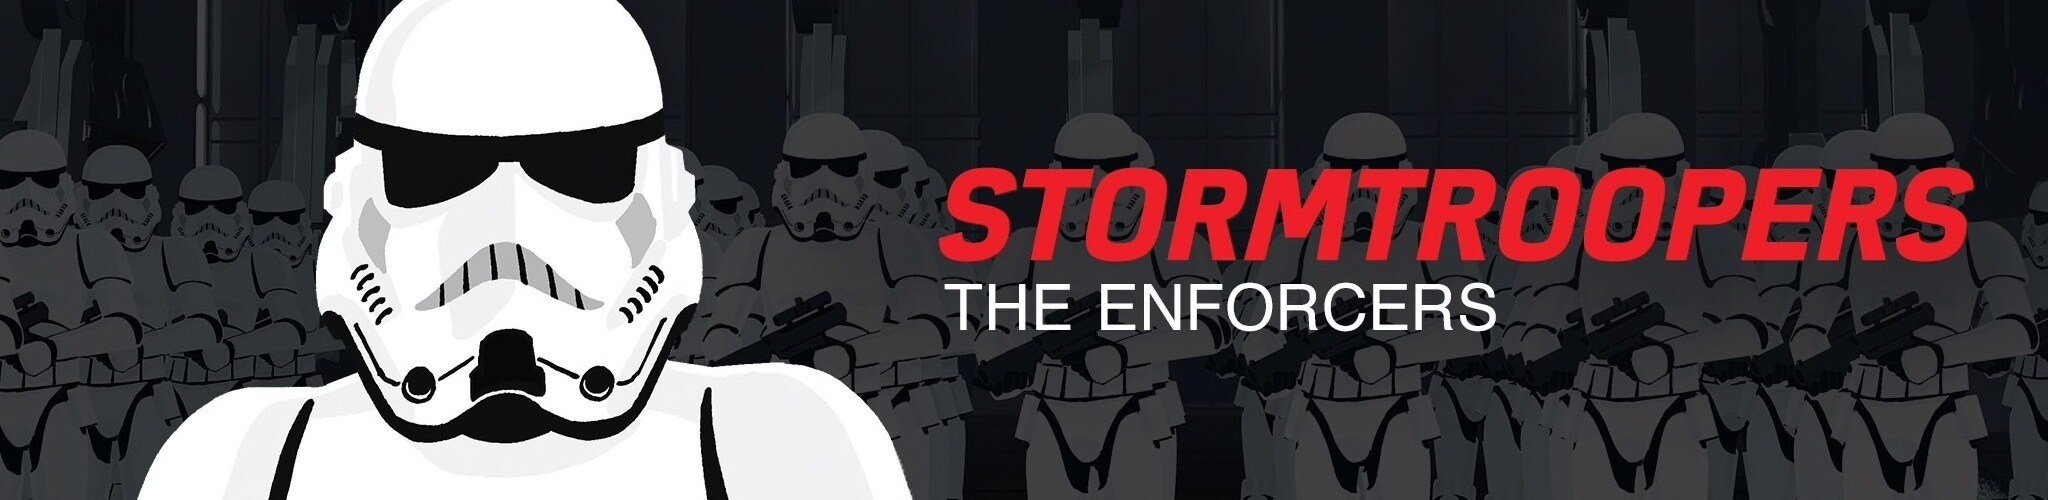 Stormtroopers - The Enforcers